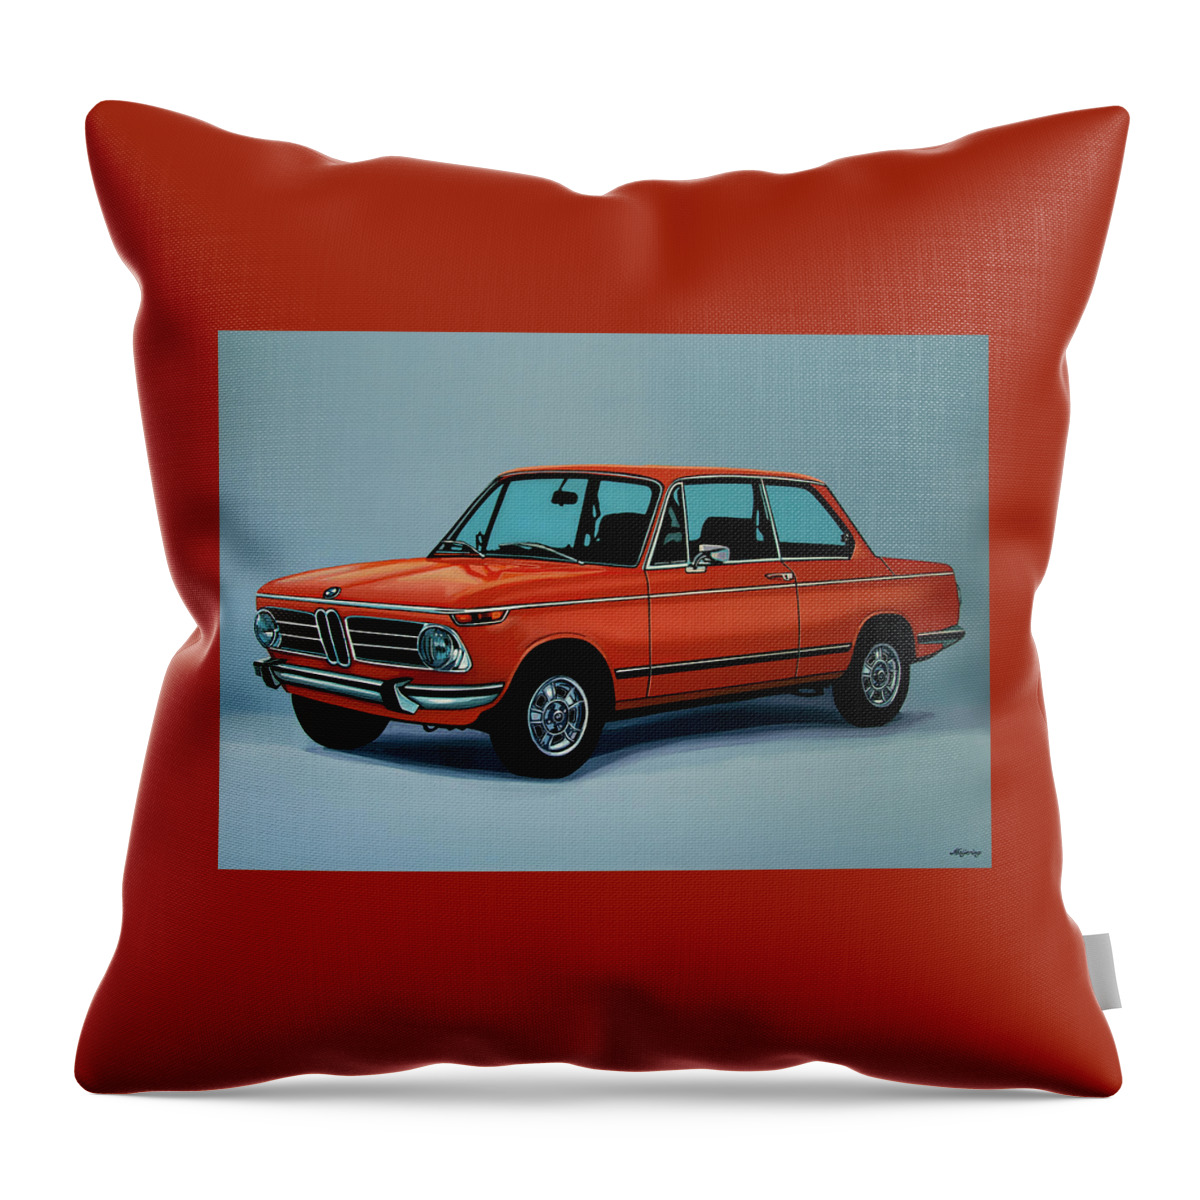 Bmw 2002 Throw Pillow featuring the painting BMW 2002 1968 Painting by Paul Meijering